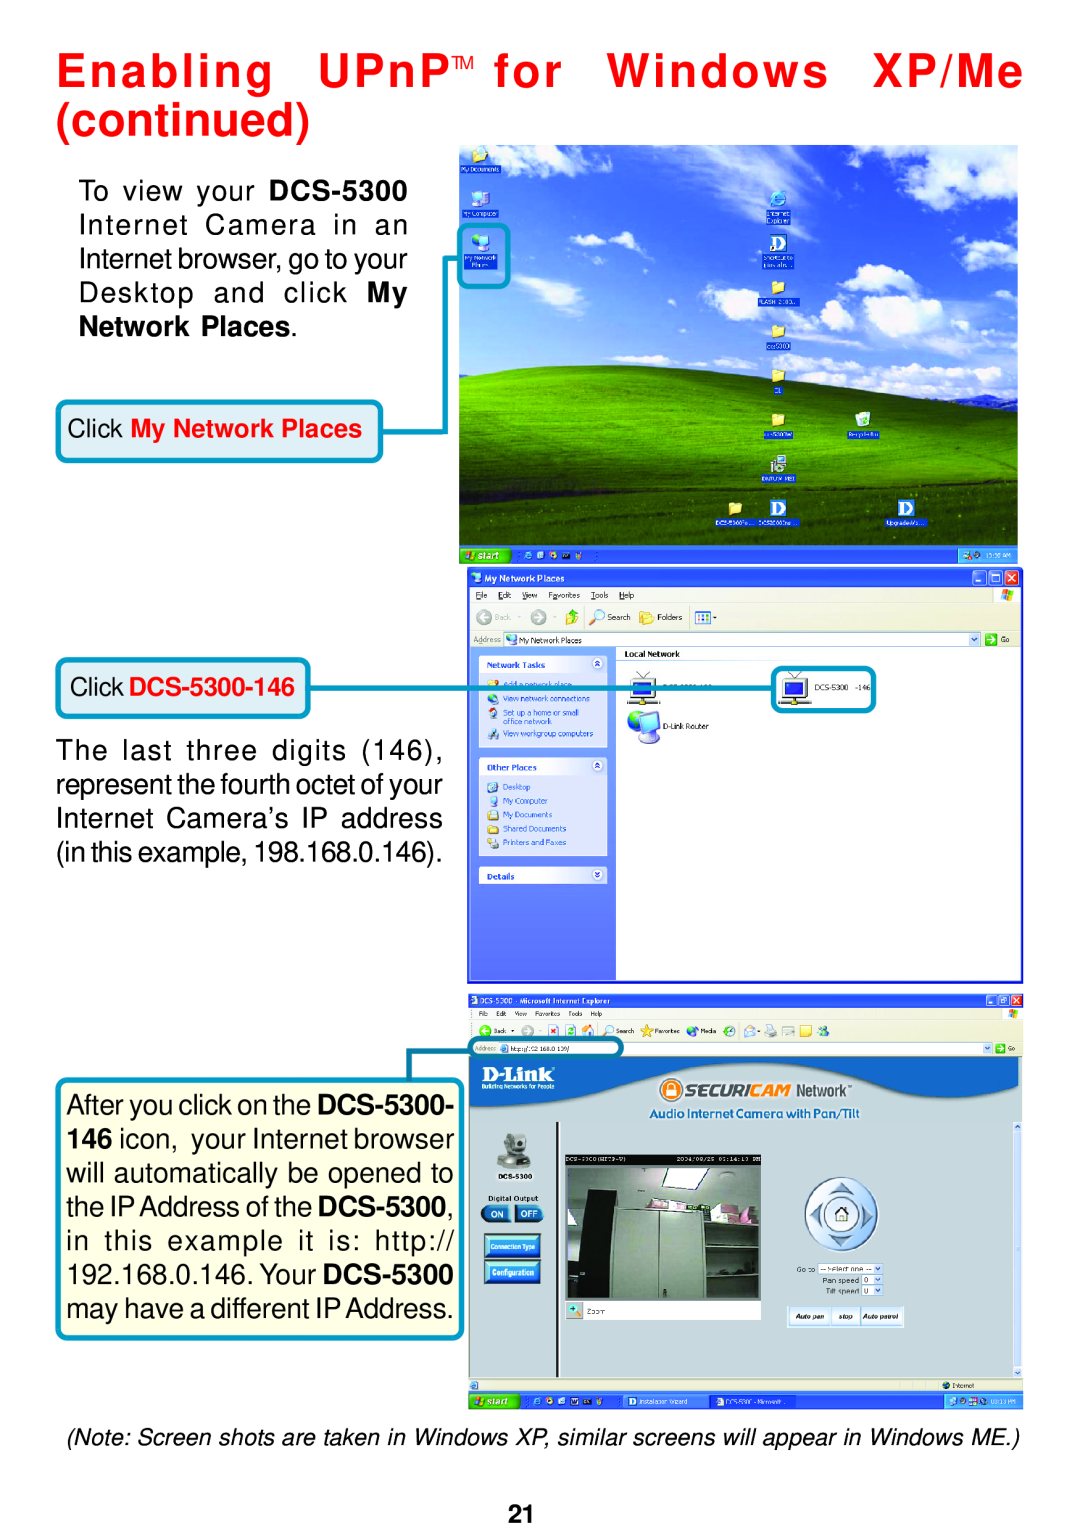 D-Link manual Enabling UPnPTM for Windows XP/Me continued, To view your DCS-5300 Internet Camera in an, Network Places 